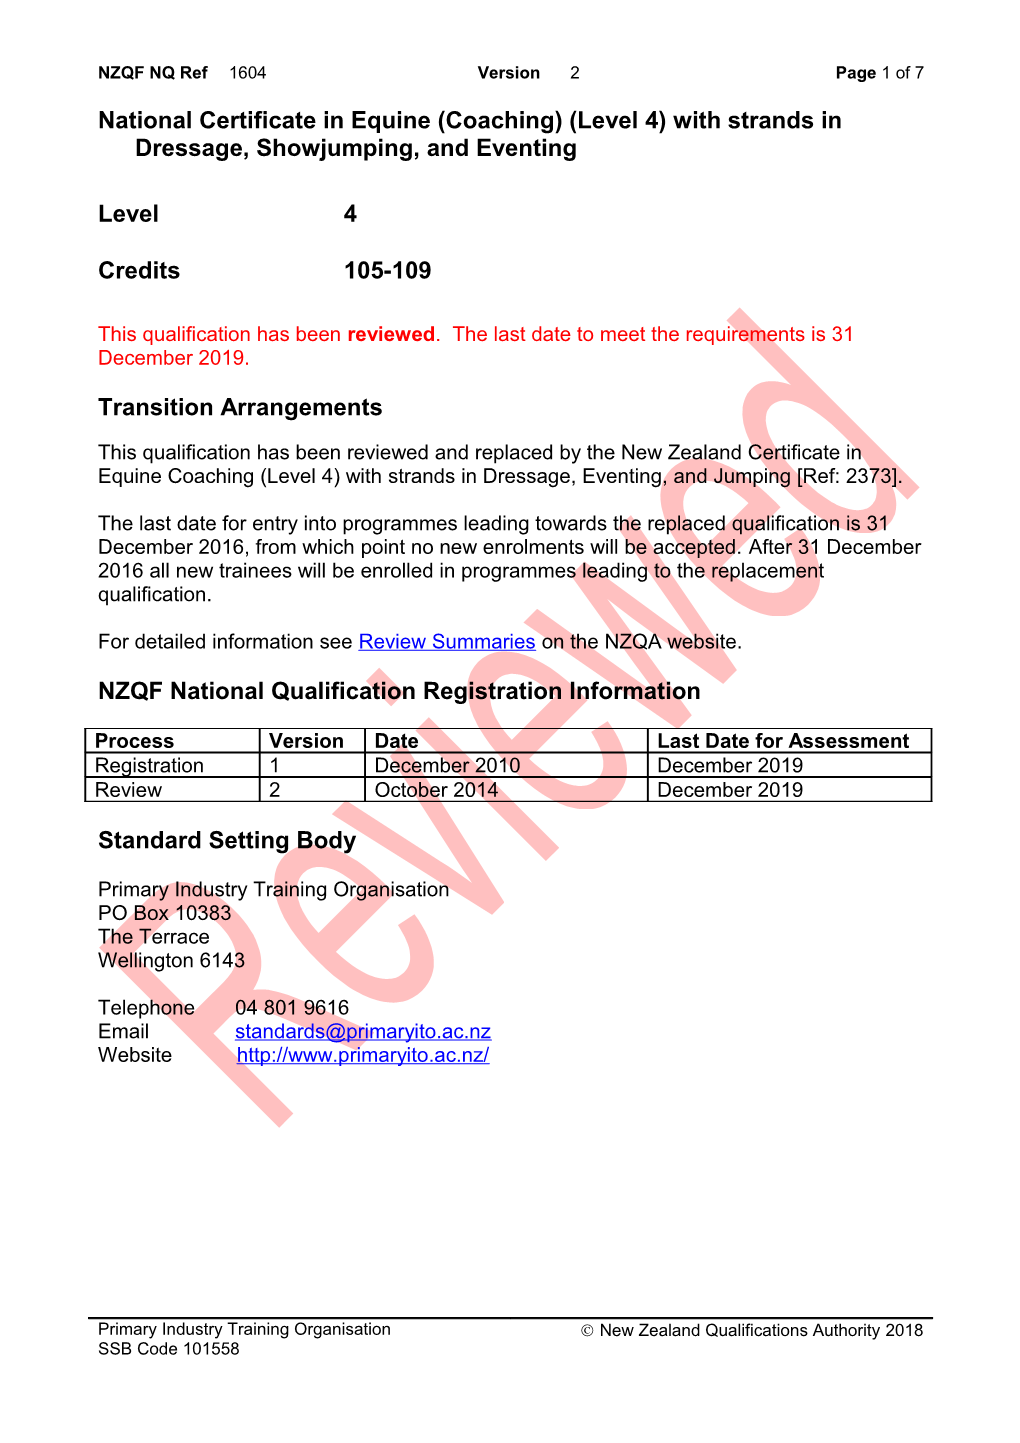 1604 National Certificate in Equine (Coaching) (Level 4) with Strands in Dressage, Showjumping